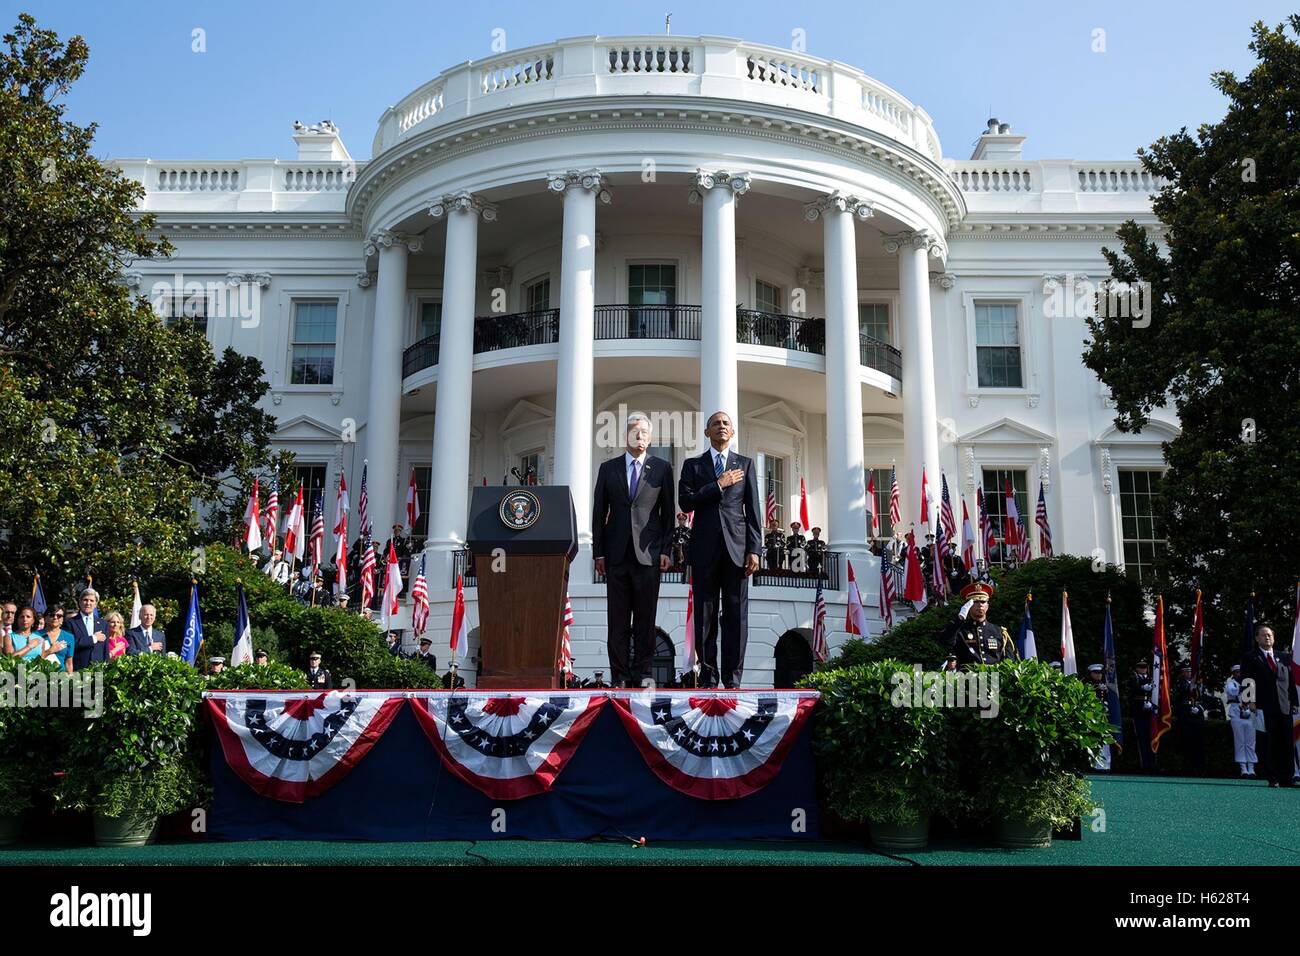 U.S. President Barack Obama and Singaporean Prime Minister Lee Hsien Loong stand during the U.S. National Anthem during the State Arrival ceremony on the White House South Lawn August 2, 2016 in Washington, DC. Stock Photo